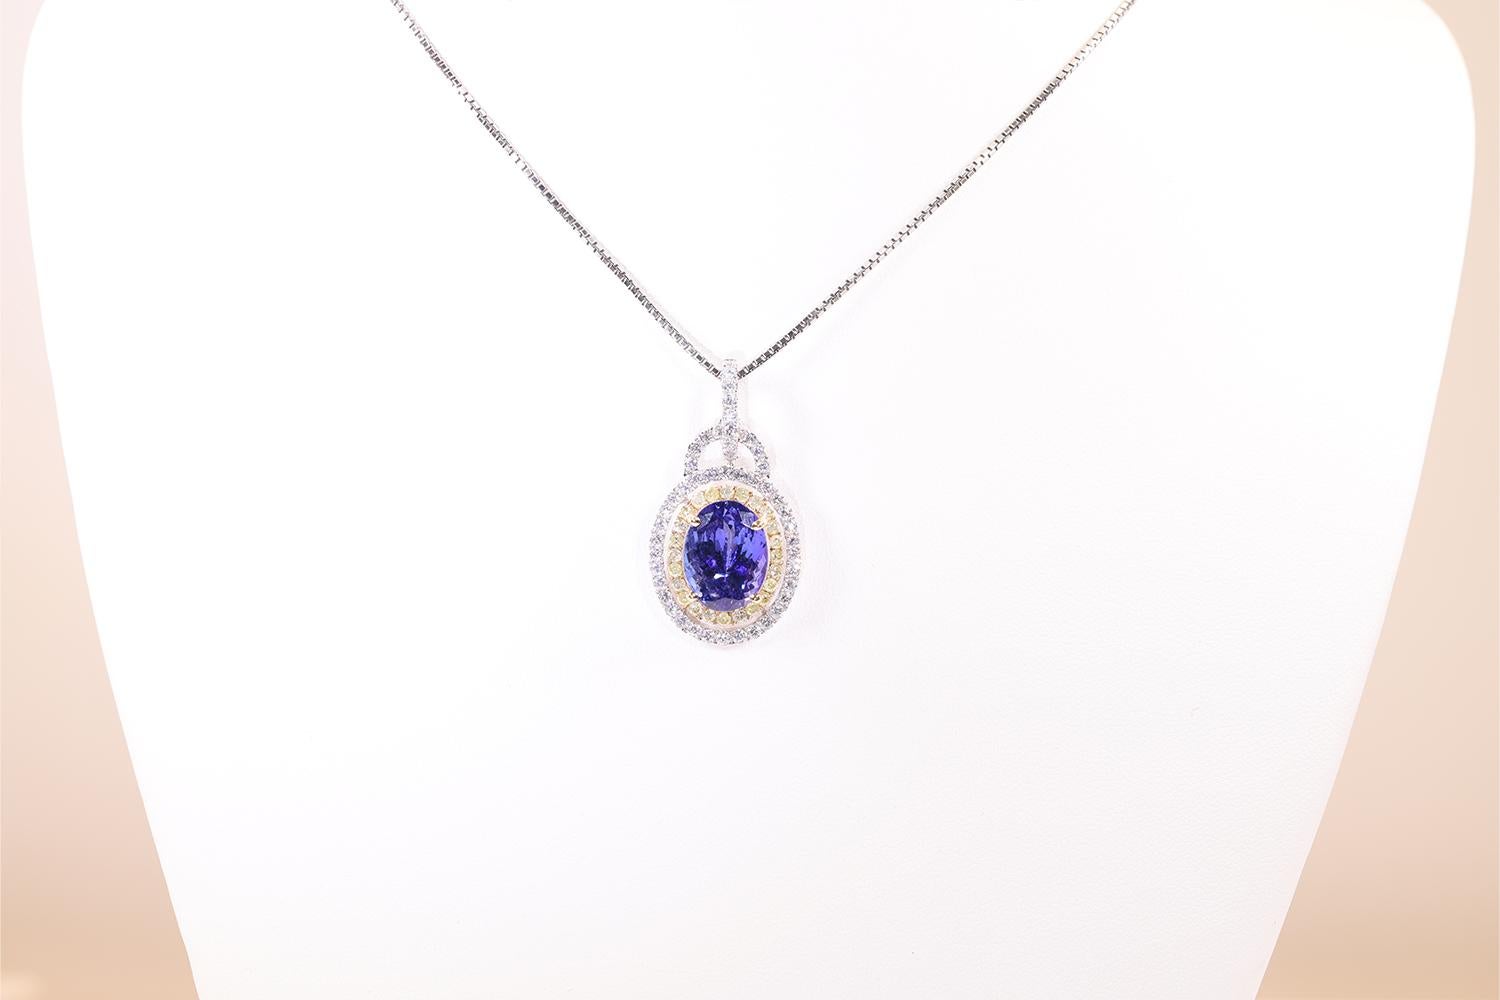 This Double Halo necklace features a Heskia Almor Design Inc. mounting with yellow and white diamonds. The center stone is a 7.17 carat AAA Tanzanite stone and the whites diamonds weigh 1.06 carats and the yellow diamonds weigh 0.57 carats creating